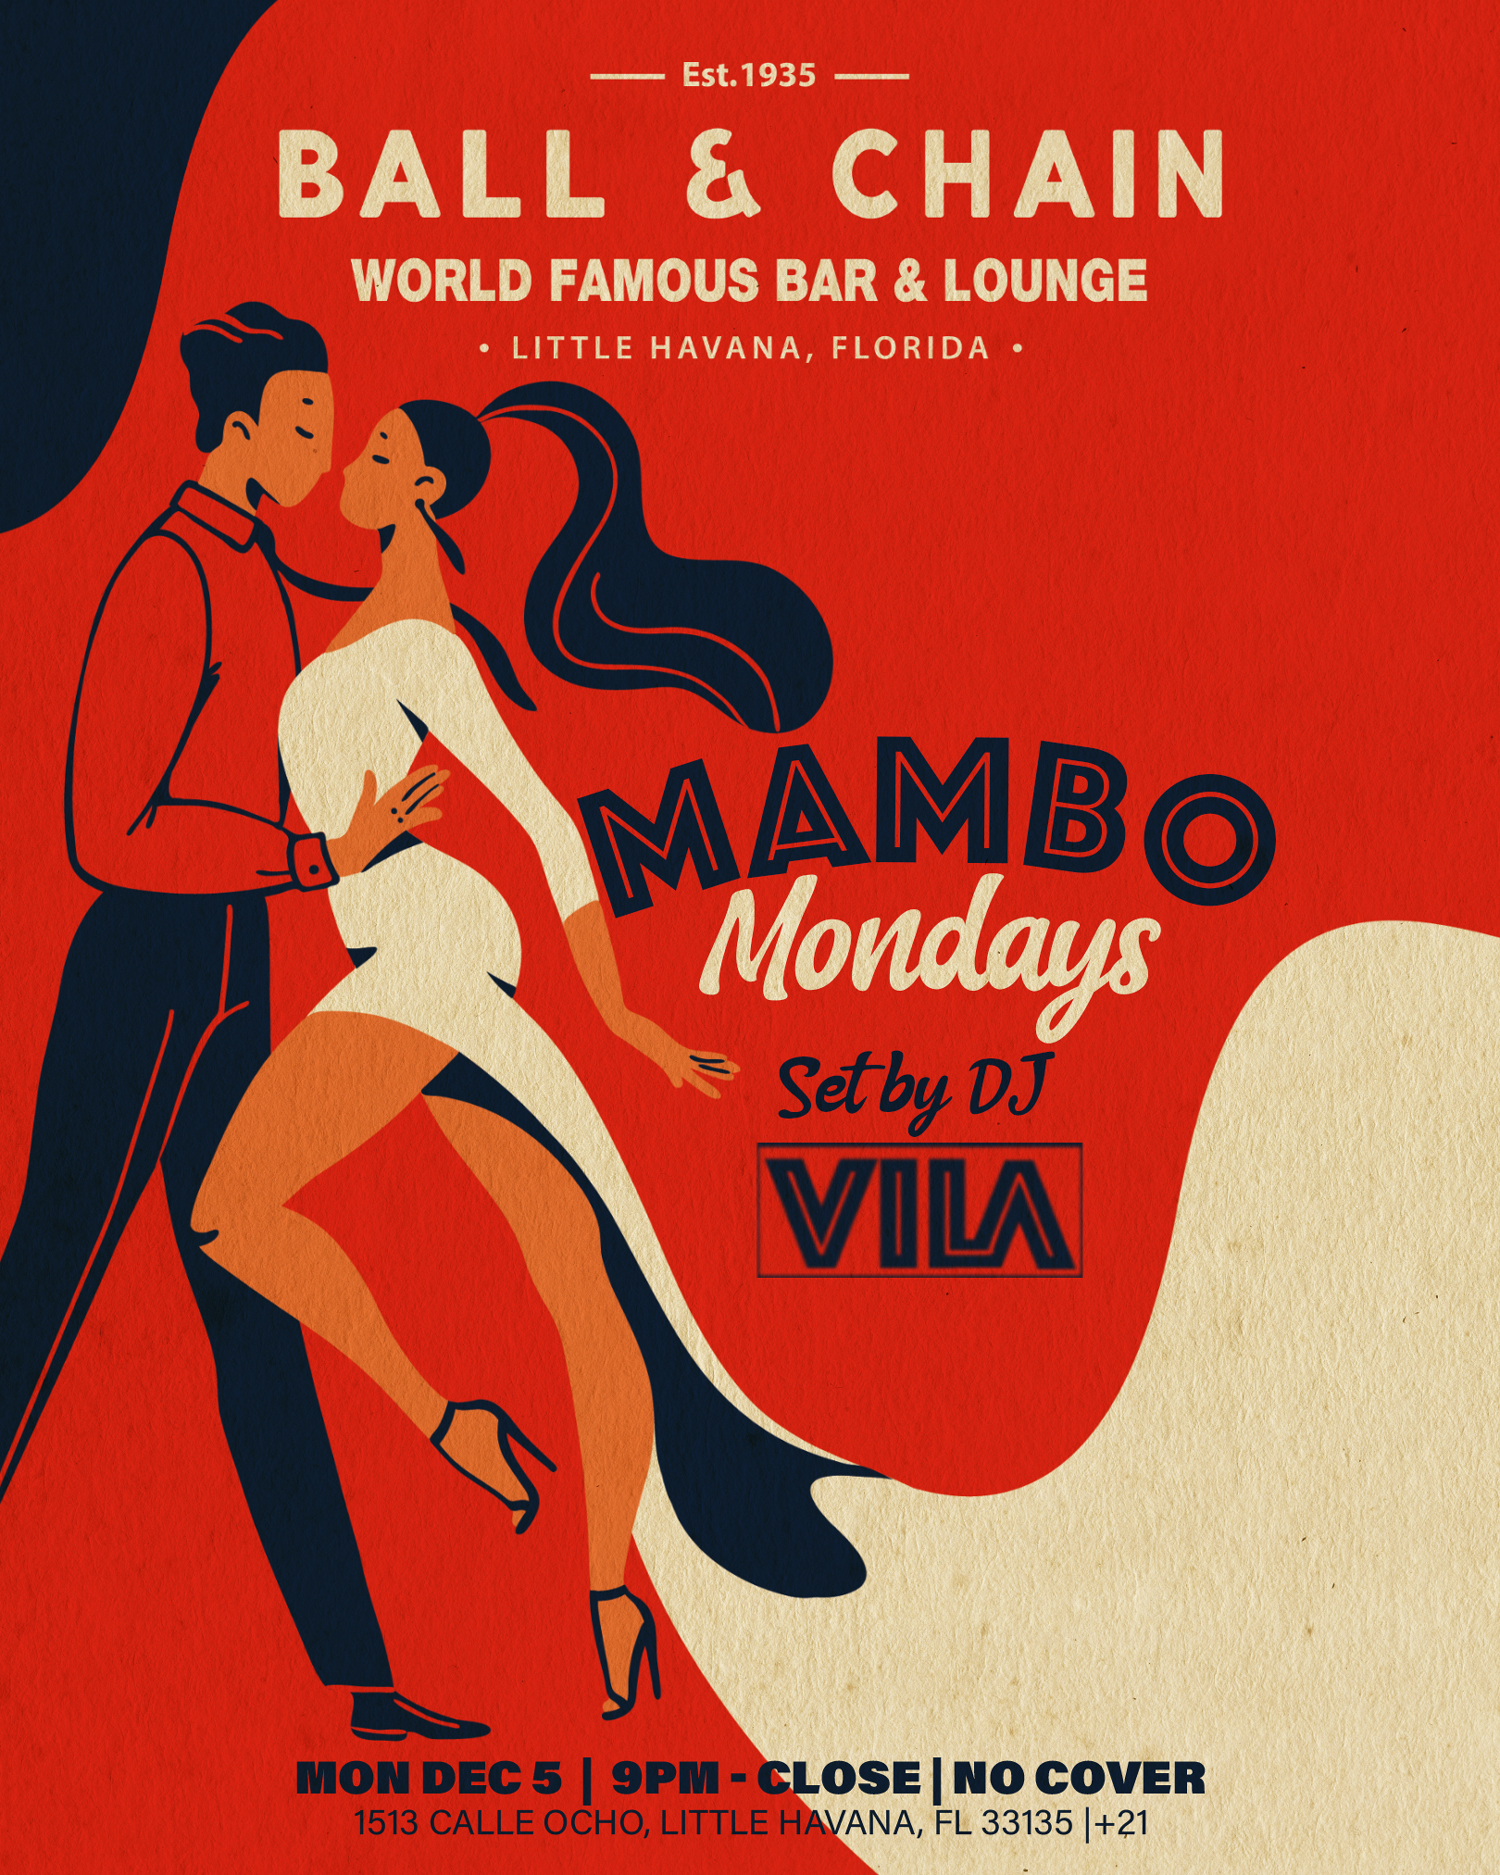 Illustration of a couple dancing the mambo